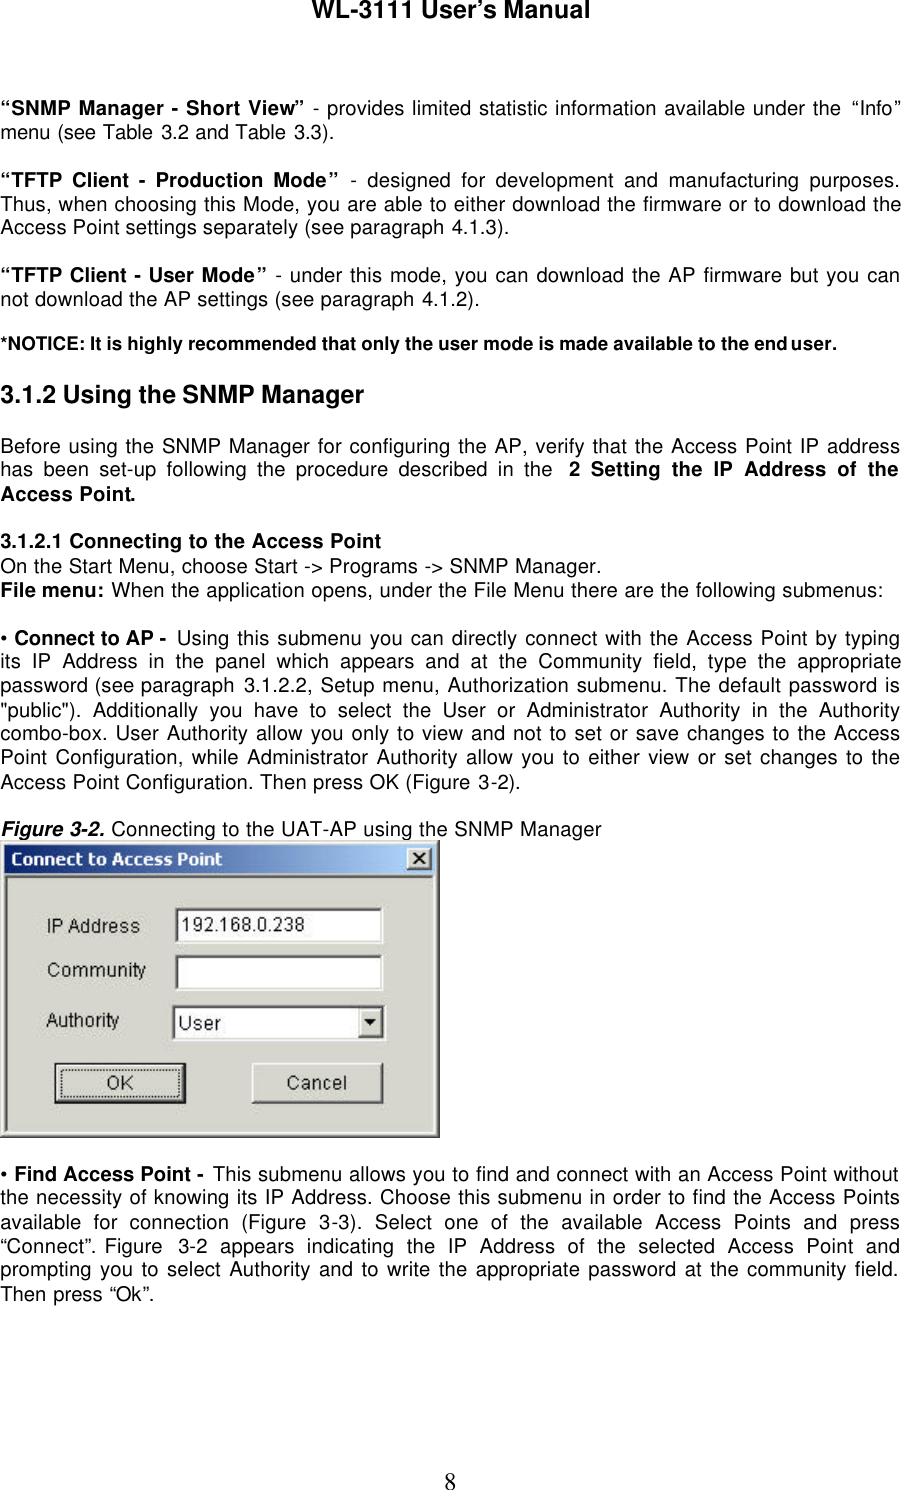 WL-3111 User’s Manual8“SNMP Manager - Short View” - provides limited statistic information available under the “Info”menu (see Table 3.2 and Table 3.3).“TFTP Client - Production Mode” - designed for development and manufacturing purposes.Thus, when choosing this Mode, you are able to either download the firmware or to download theAccess Point settings separately (see paragraph 4.1.3).“TFTP Client - User Mode” - under this mode, you can download the AP firmware but you cannot download the AP settings (see paragraph 4.1.2).*NOTICE: It is highly recommended that only the user mode is made available to the end user.3.1.2 Using the SNMP ManagerBefore using the SNMP Manager for configuring the AP, verify that the Access Point IP addresshas been set-up following the procedure described in the  2  Setting the IP Address of theAccess Point.3.1.2.1 Connecting to the Access PointOn the Start Menu, choose Start -&gt; Programs -&gt; SNMP Manager.File menu: When the application opens, under the File Menu there are the following submenus:• Connect to AP -  Using this submenu you can directly connect with the Access Point by typingits IP Address in the panel which appears and at the Community field, type the appropriatepassword (see paragraph 3.1.2.2, Setup menu, Authorization submenu. The default password is&quot;public&quot;). Additionally you have to select the User or Administrator Authority in the Authoritycombo-box. User Authority allow you only to view and not to set or save changes to the AccessPoint Configuration, while Administrator Authority allow you to either view or set changes to theAccess Point Configuration. Then press OK (Figure 3-2).Figure 3-2. Connecting to the UAT-AP using the SNMP Manager• Find Access Point - This submenu allows you to find and connect with an Access Point withoutthe necessity of knowing its IP Address. Choose this submenu in order to find the Access Pointsavailable for connection (Figure 3-3). Select one of the available Access Points and press“Connect”. Figure  3-2 appears indicating the IP Address of the selected Access Point andprompting you to select Authority and to write the appropriate password at the community field.Then press “Ok”.